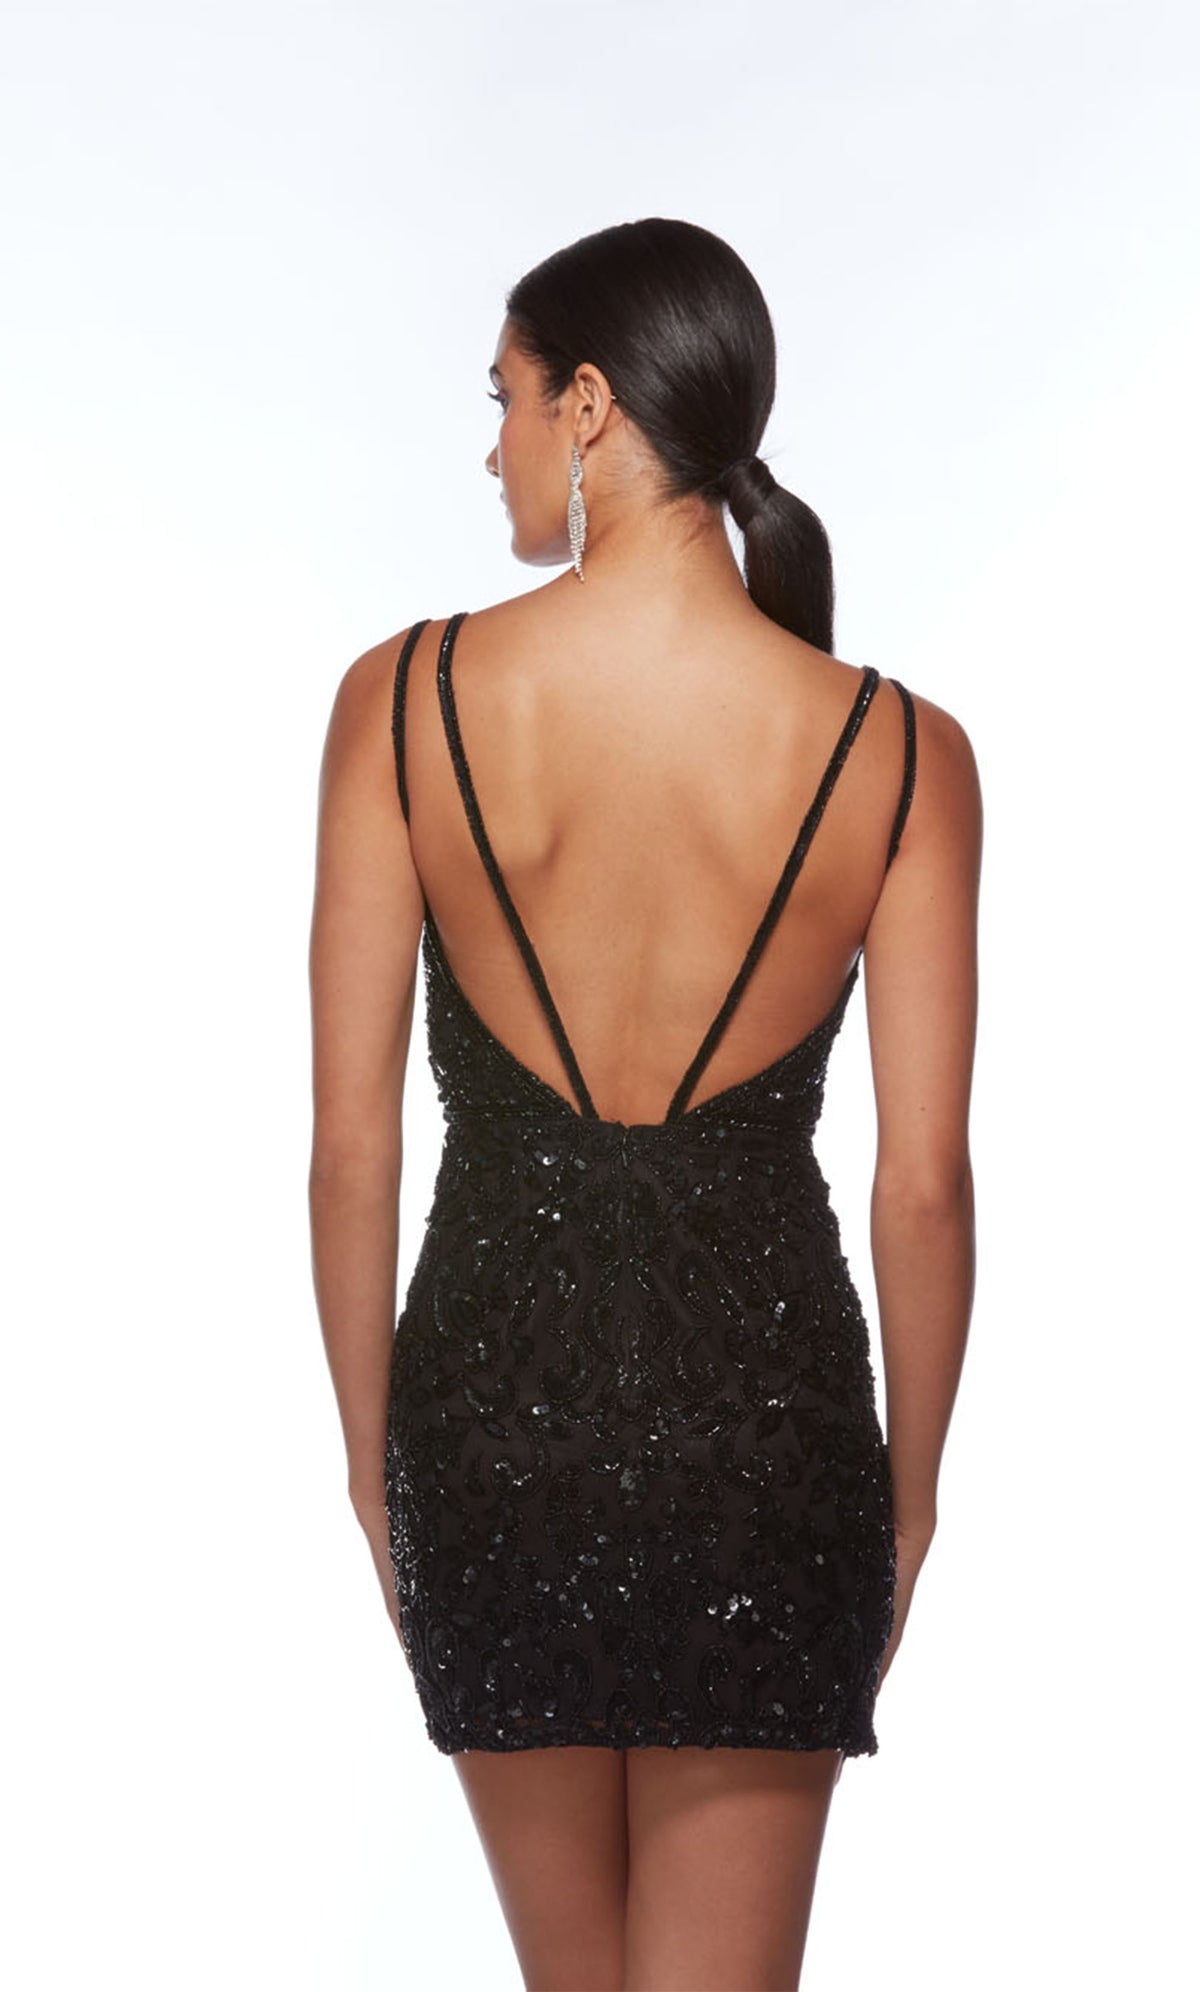 LBD featuring an hand-beaded paisley-patterned design for an playful and stylish look.